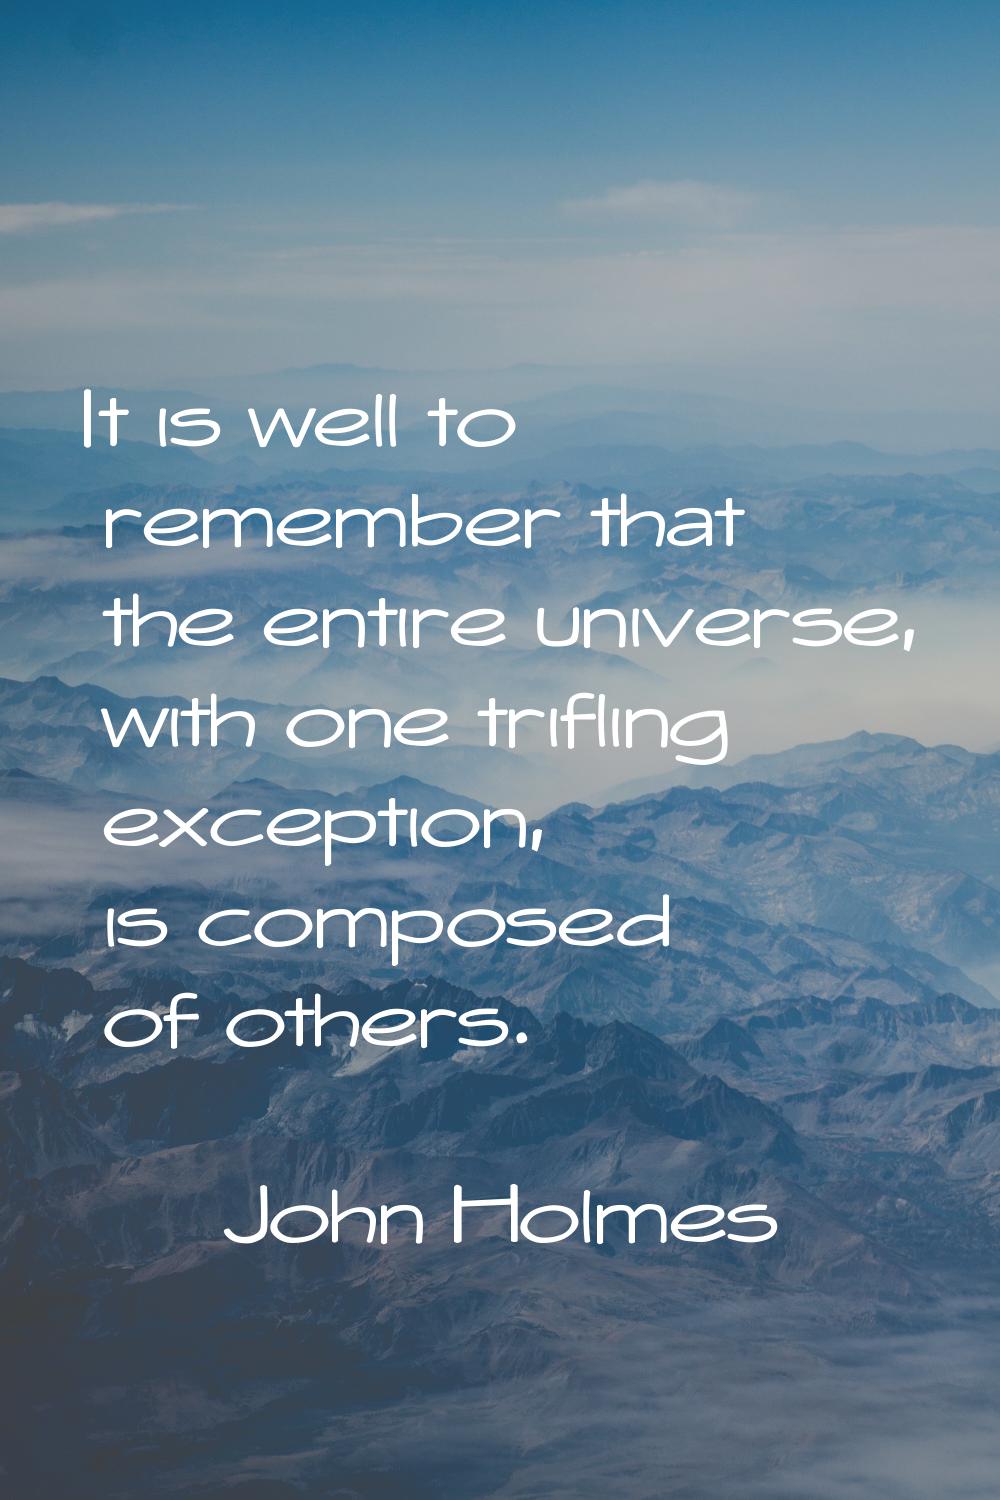 It is well to remember that the entire universe, with one trifling exception, is composed of others